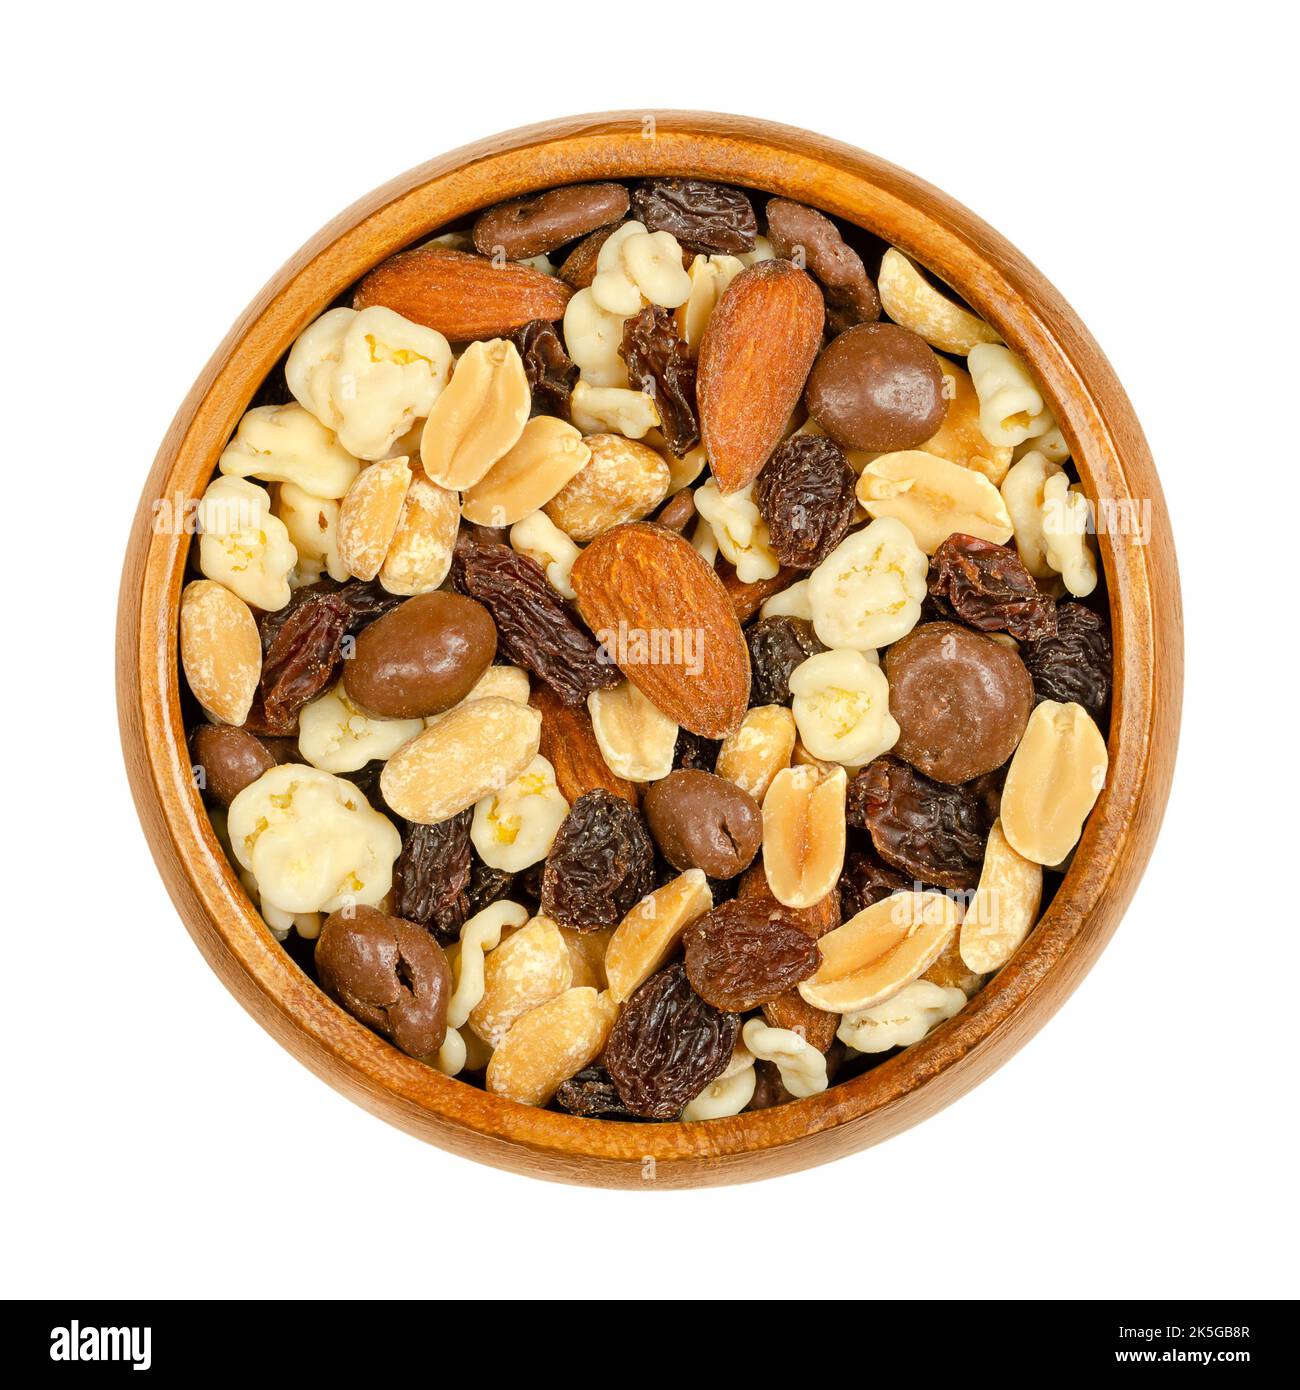 Nut chocolate mix, in wooden bowl. Sweet snack food and mixture of raisins, roasted peanuts and almonds, with milk and white chocolate. Stock Photo